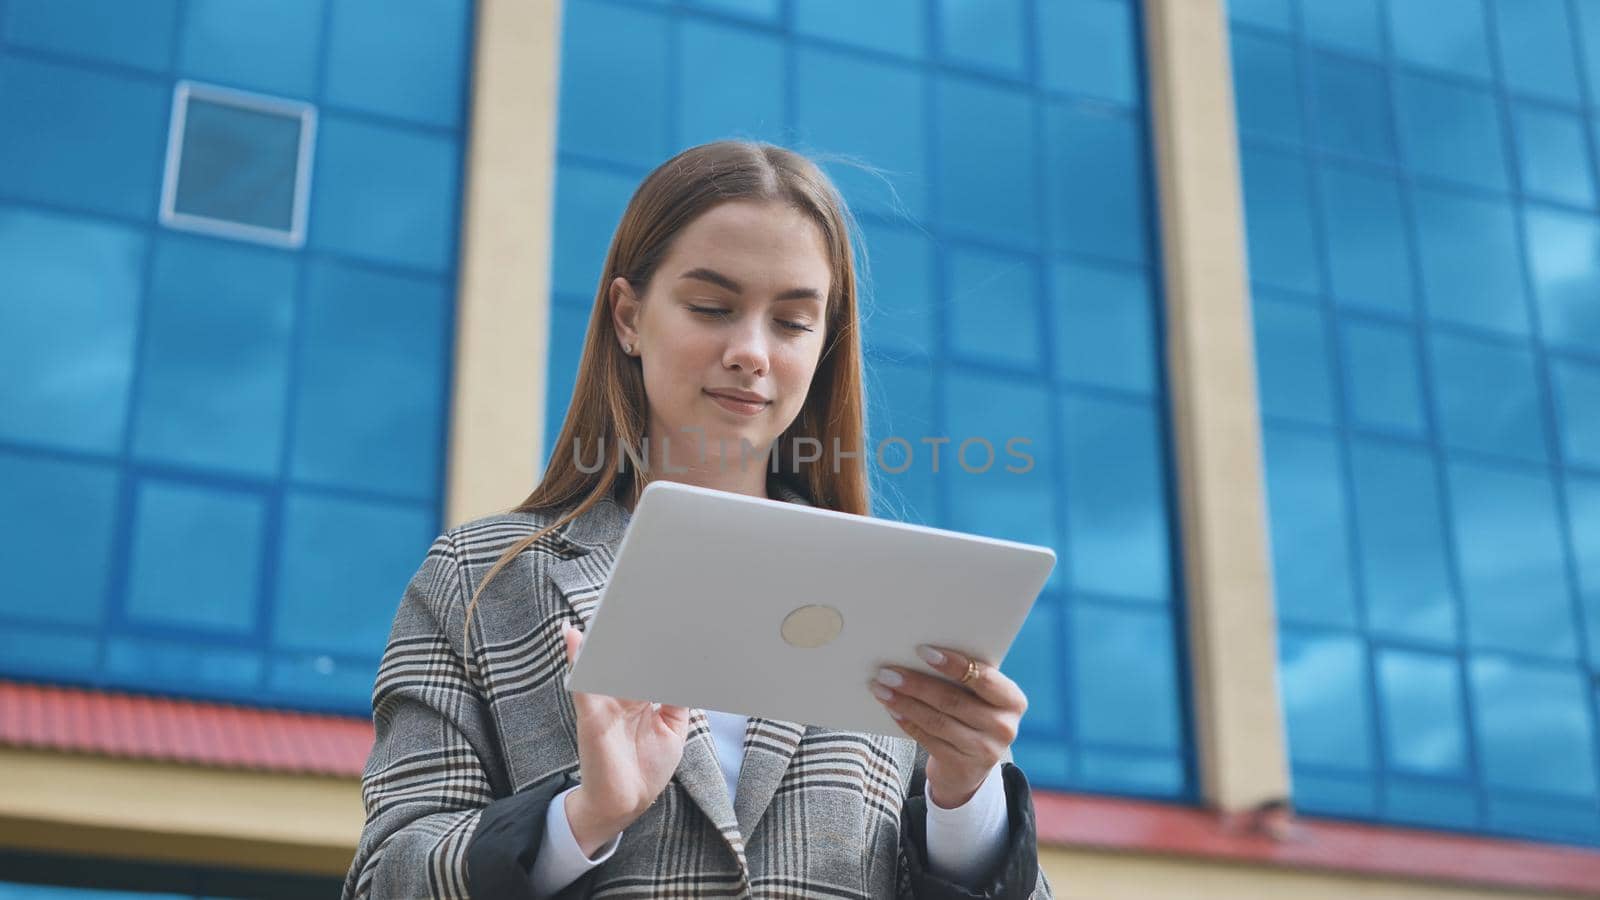 A young girl student works with a white tablet in the city